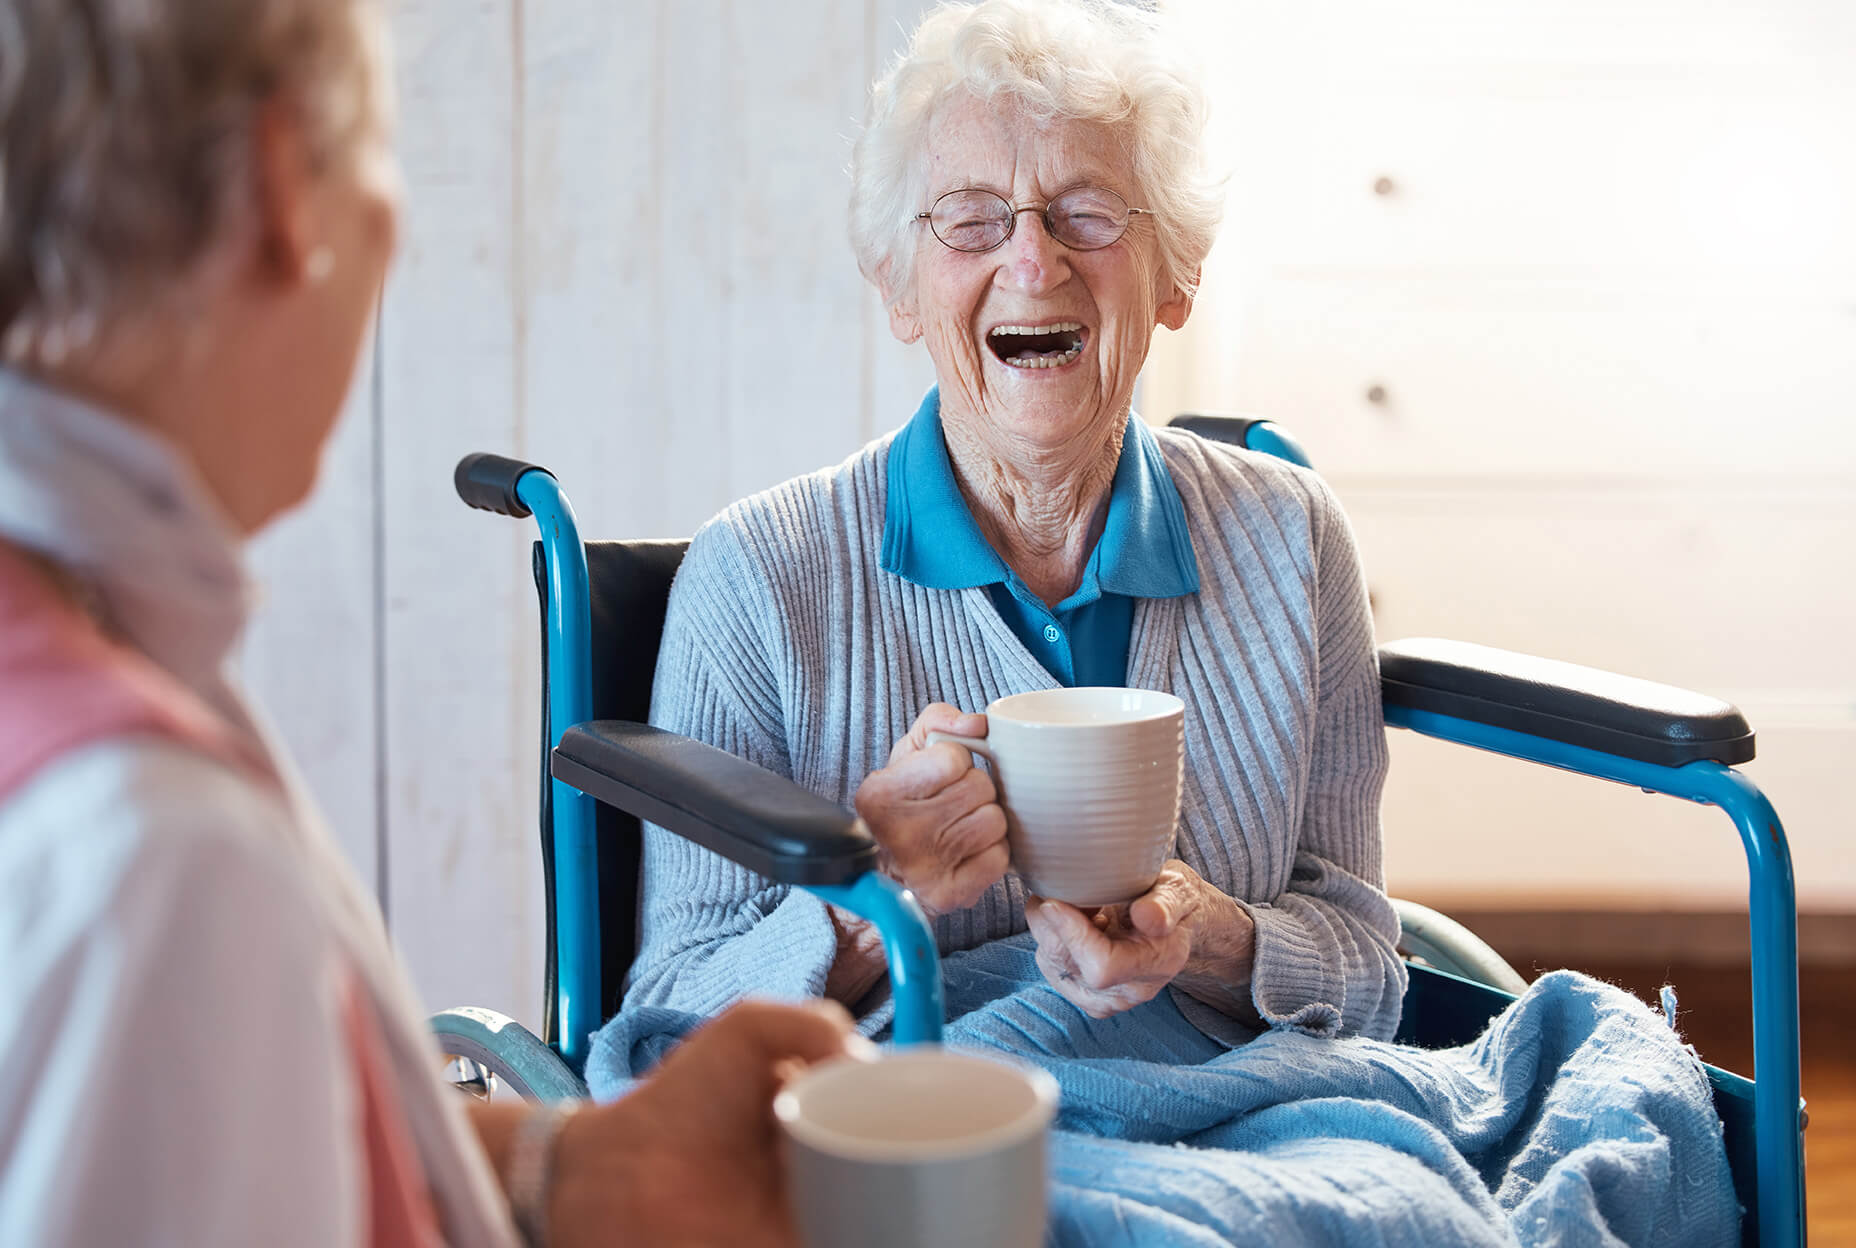 Two older women laughing together while drinking tea